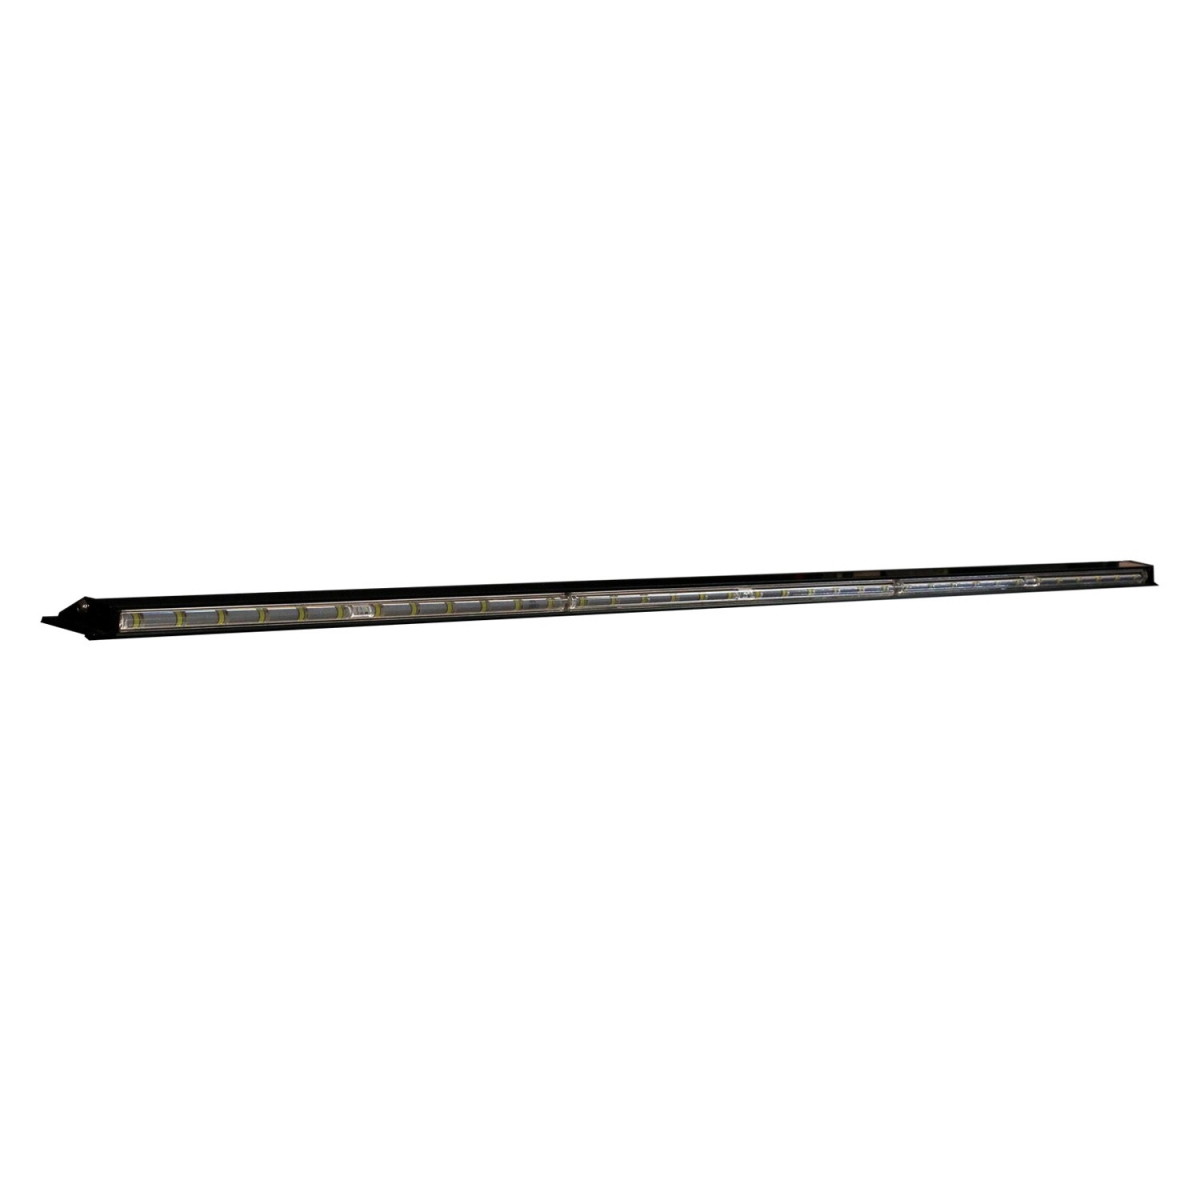 DIRECTIONAL, LED, 60IN OUTLINER PERIMETER BAR, LEFT WIRE EXIT, 12VDC, DUAL-COLOR,AMBER/WHITE